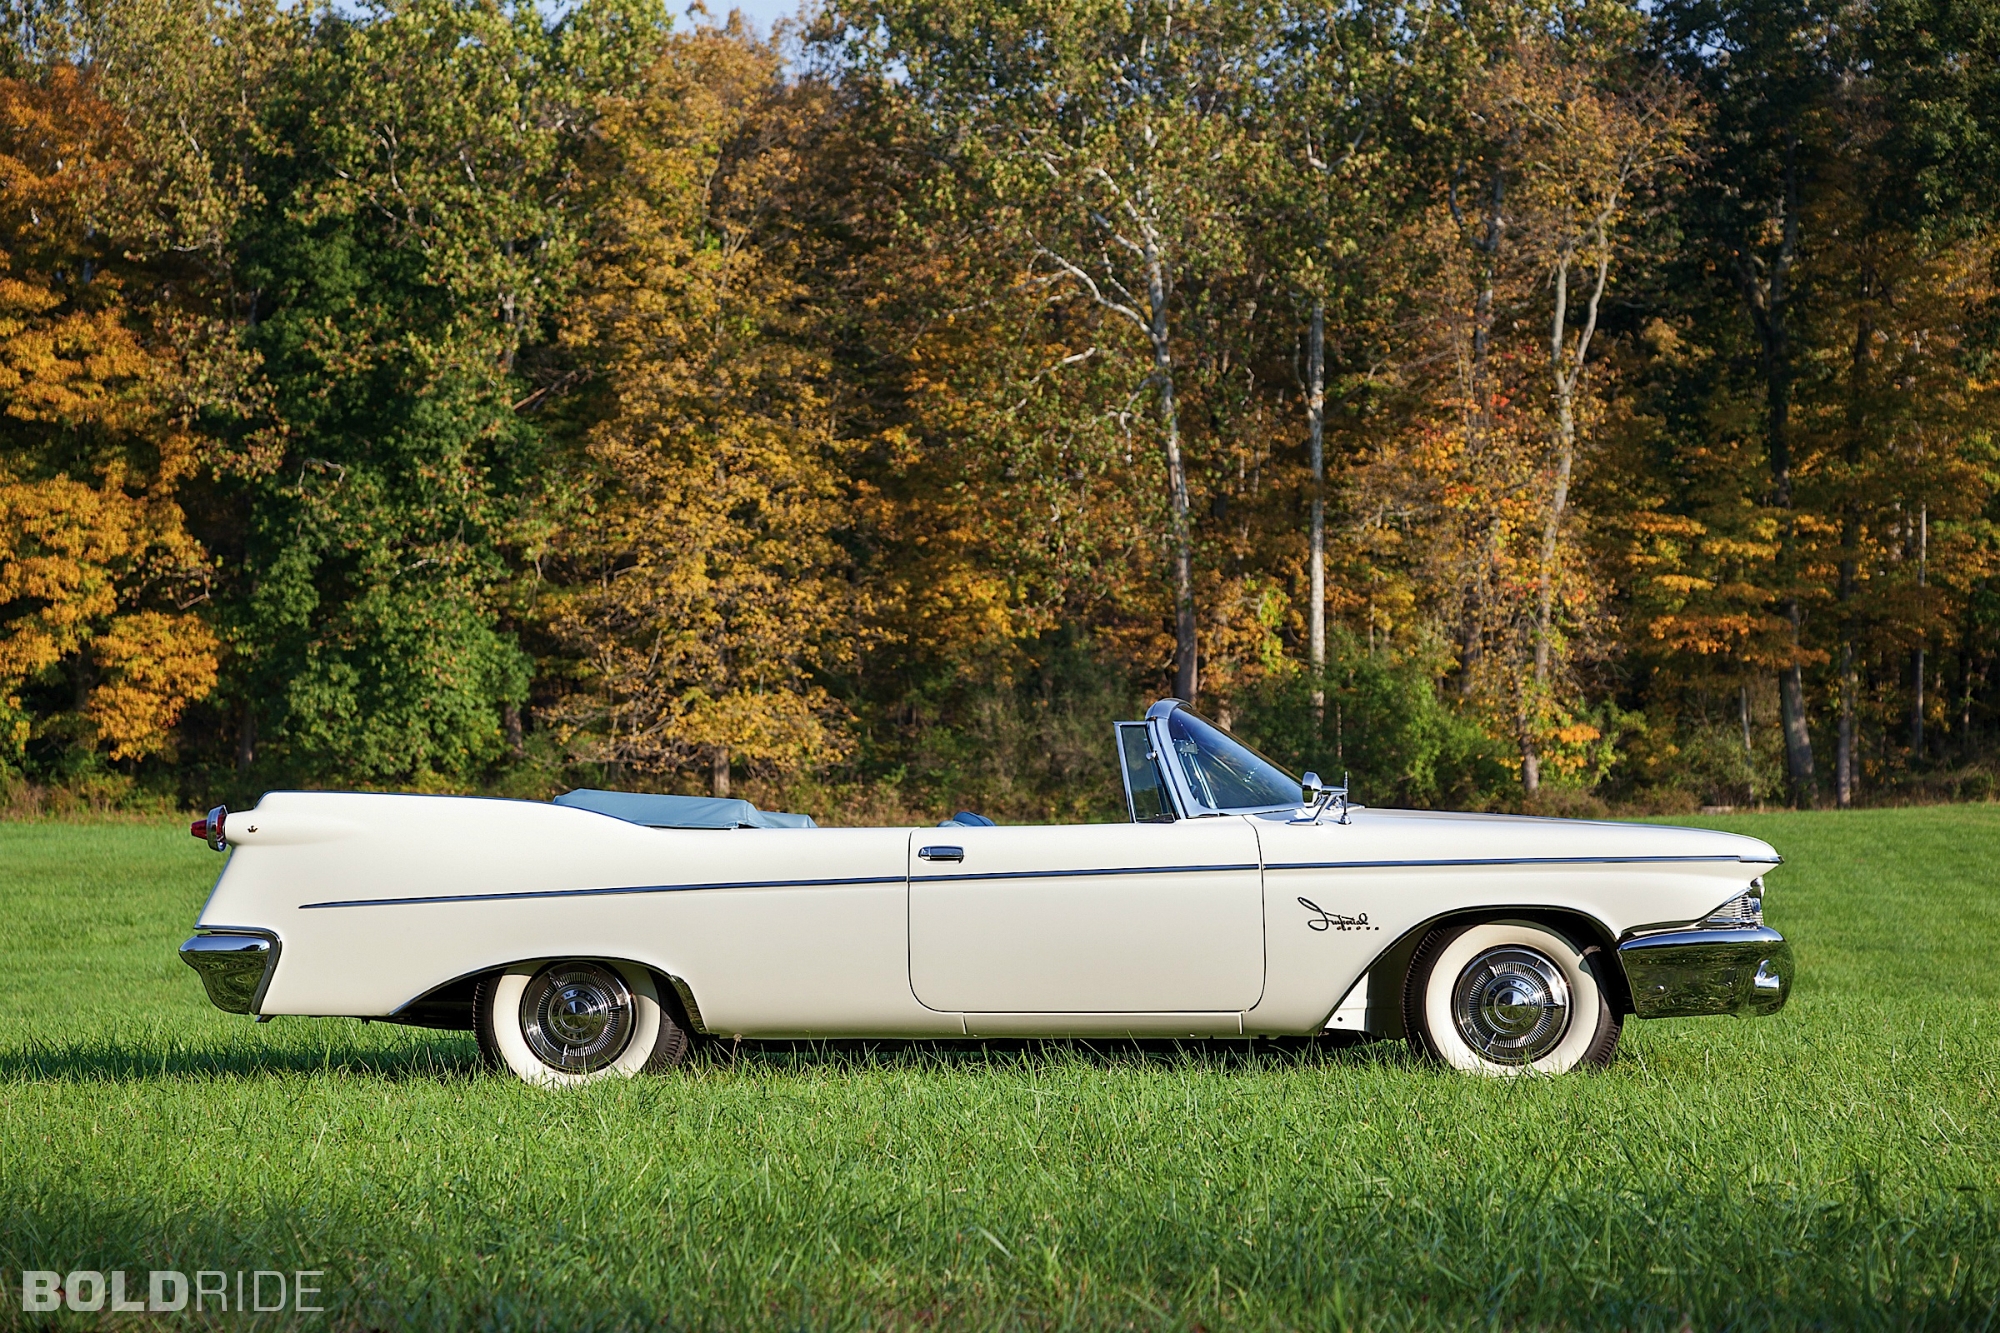 1960 Imperial Crown Convertible Boldride.com - Pictures, Wallpapers